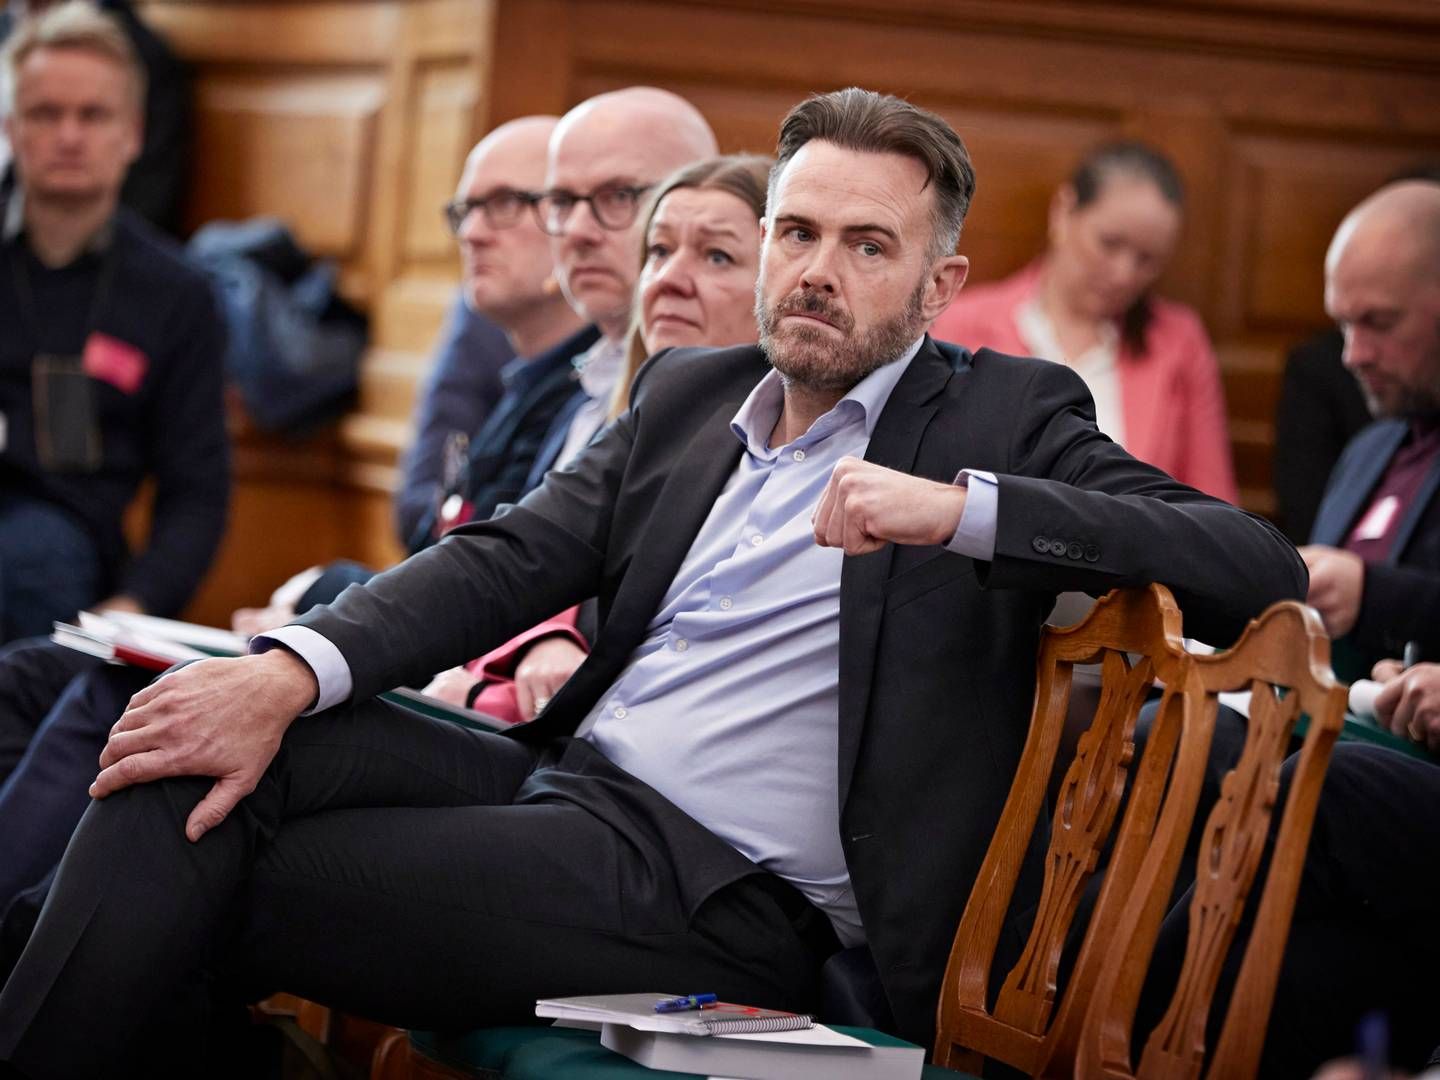 Peter Stensgaard Mørch is seen in the Danish parliament in his role as permanent secretary at the Ministry of Finance. | Photo: Jens Dresling